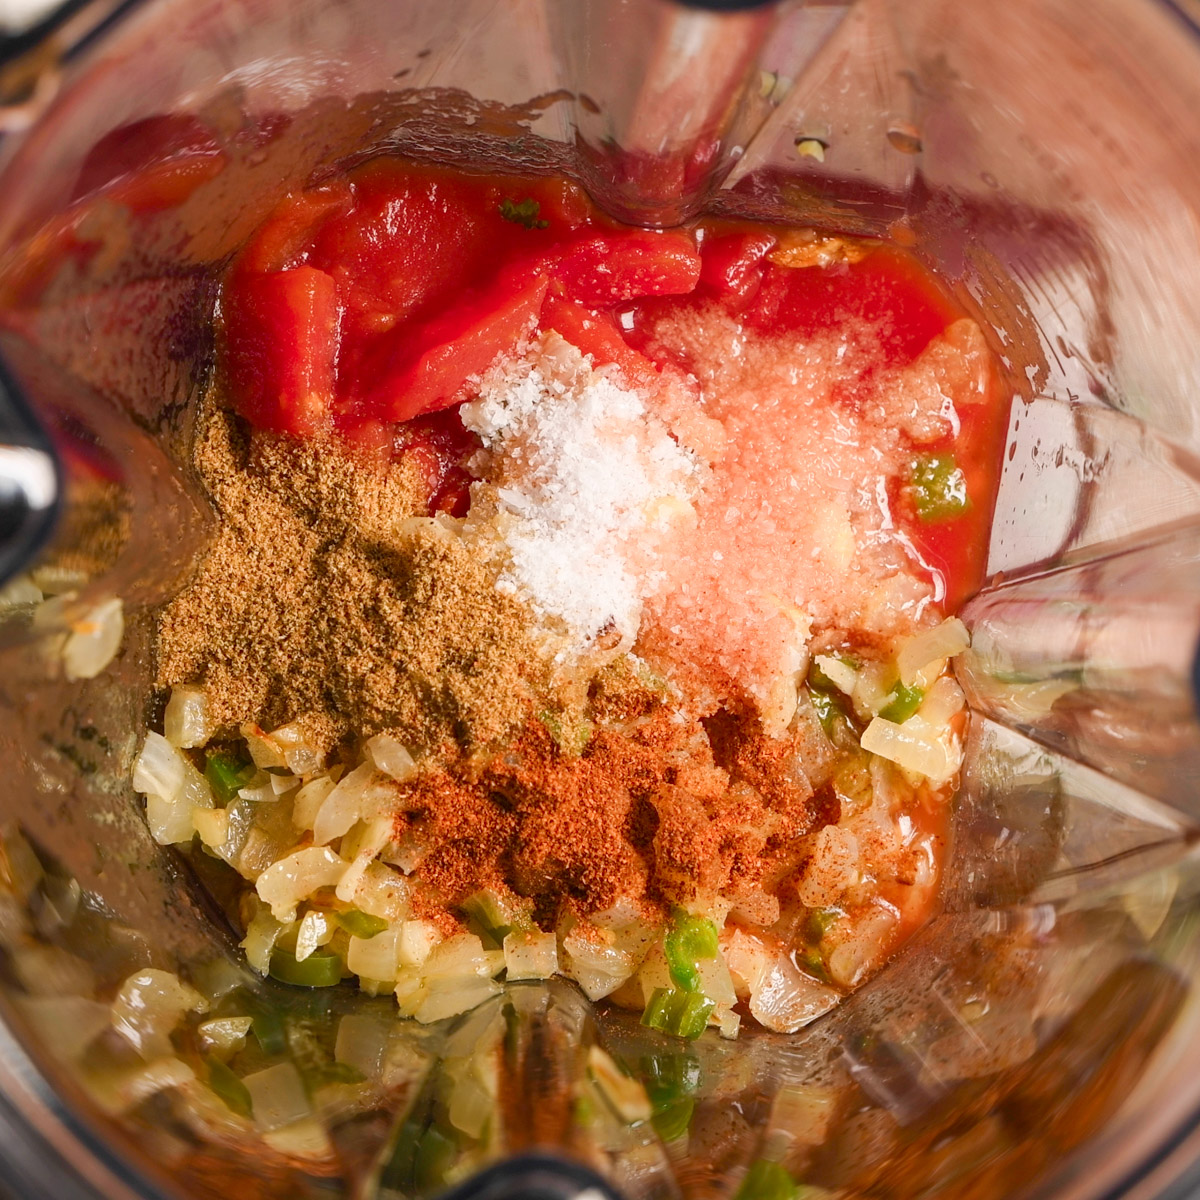 Add onion and spices to a blender.